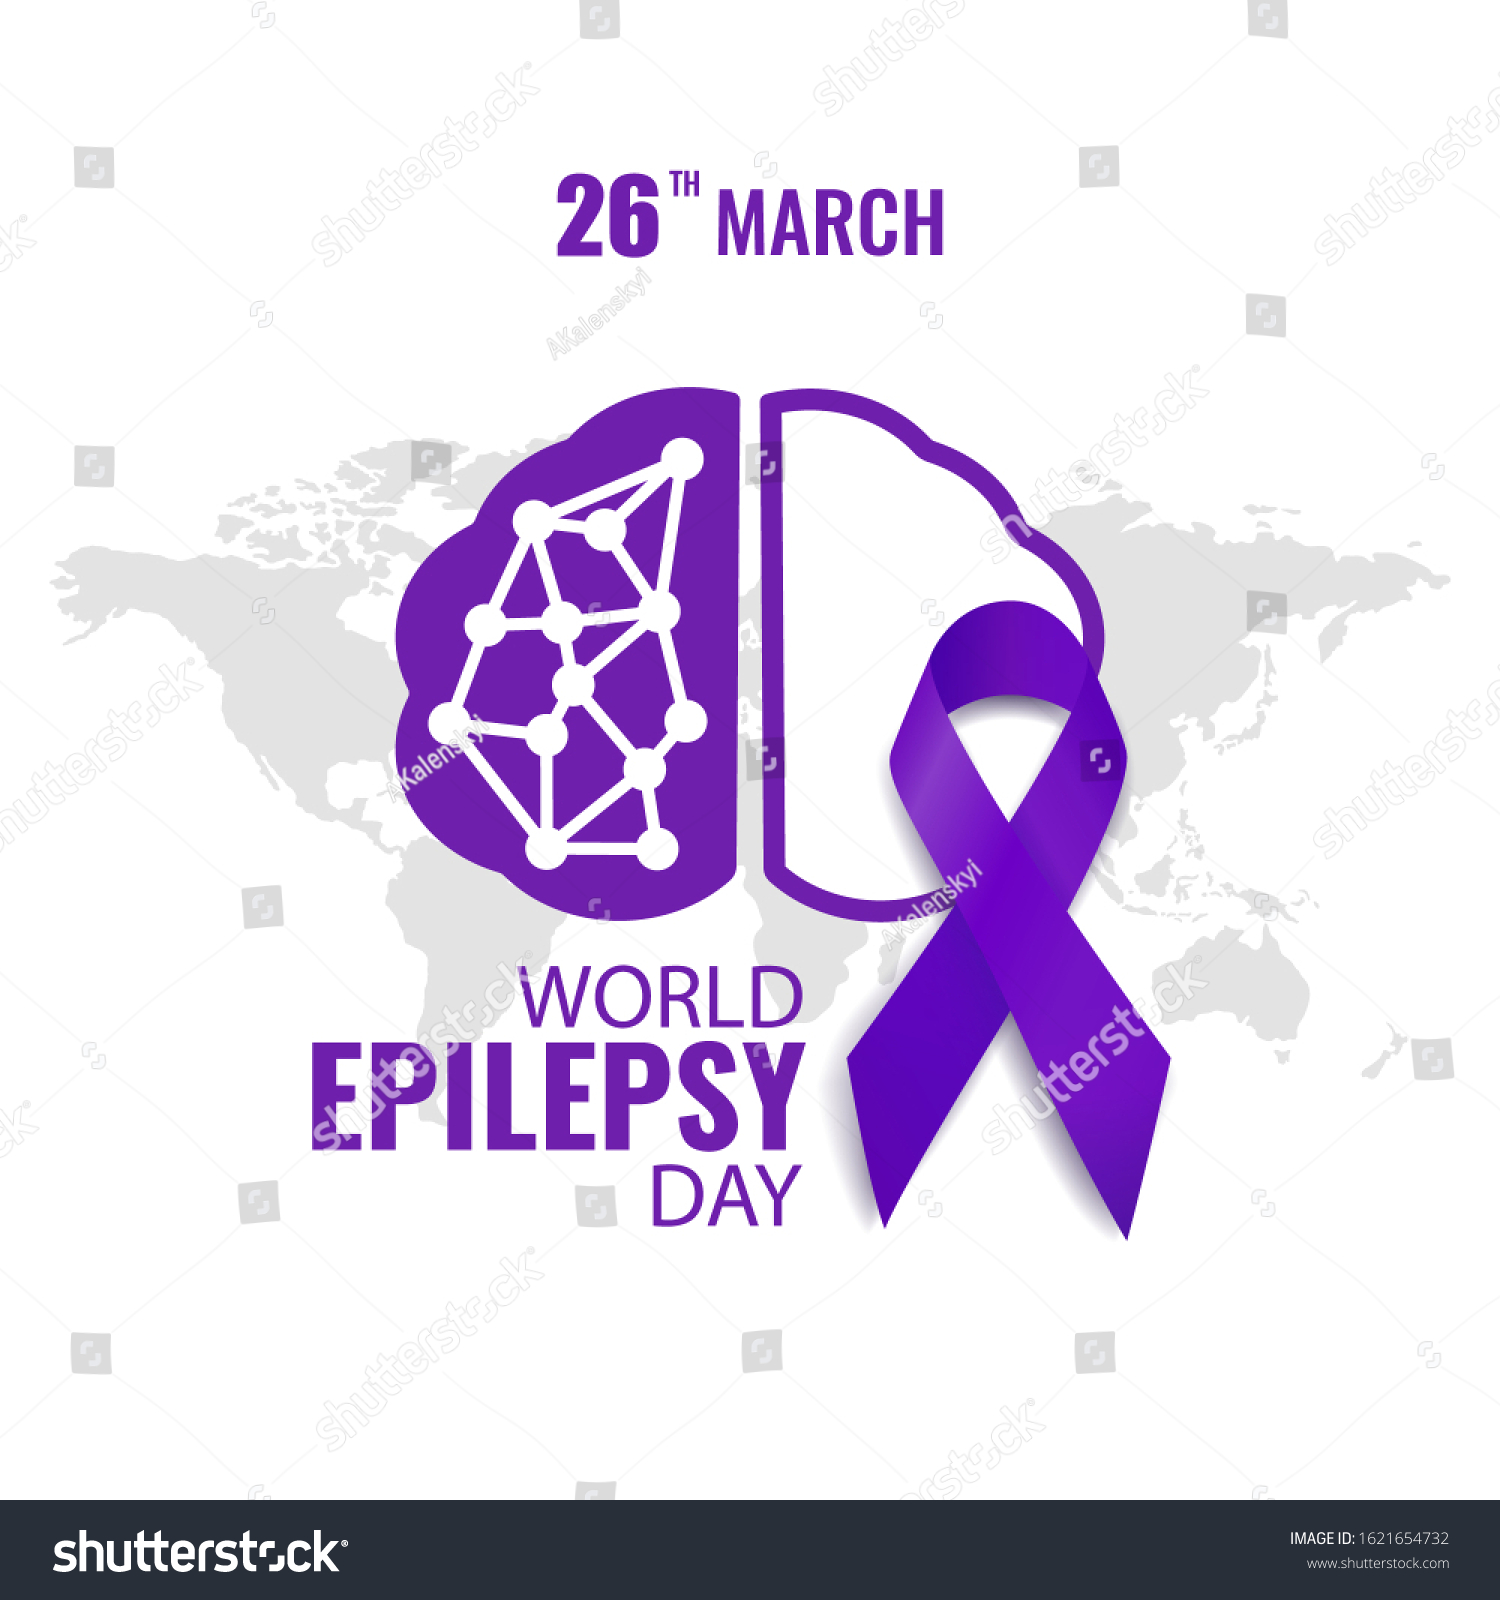 World epilepsy day Images, Stock Photos & Vectors Shutterstock